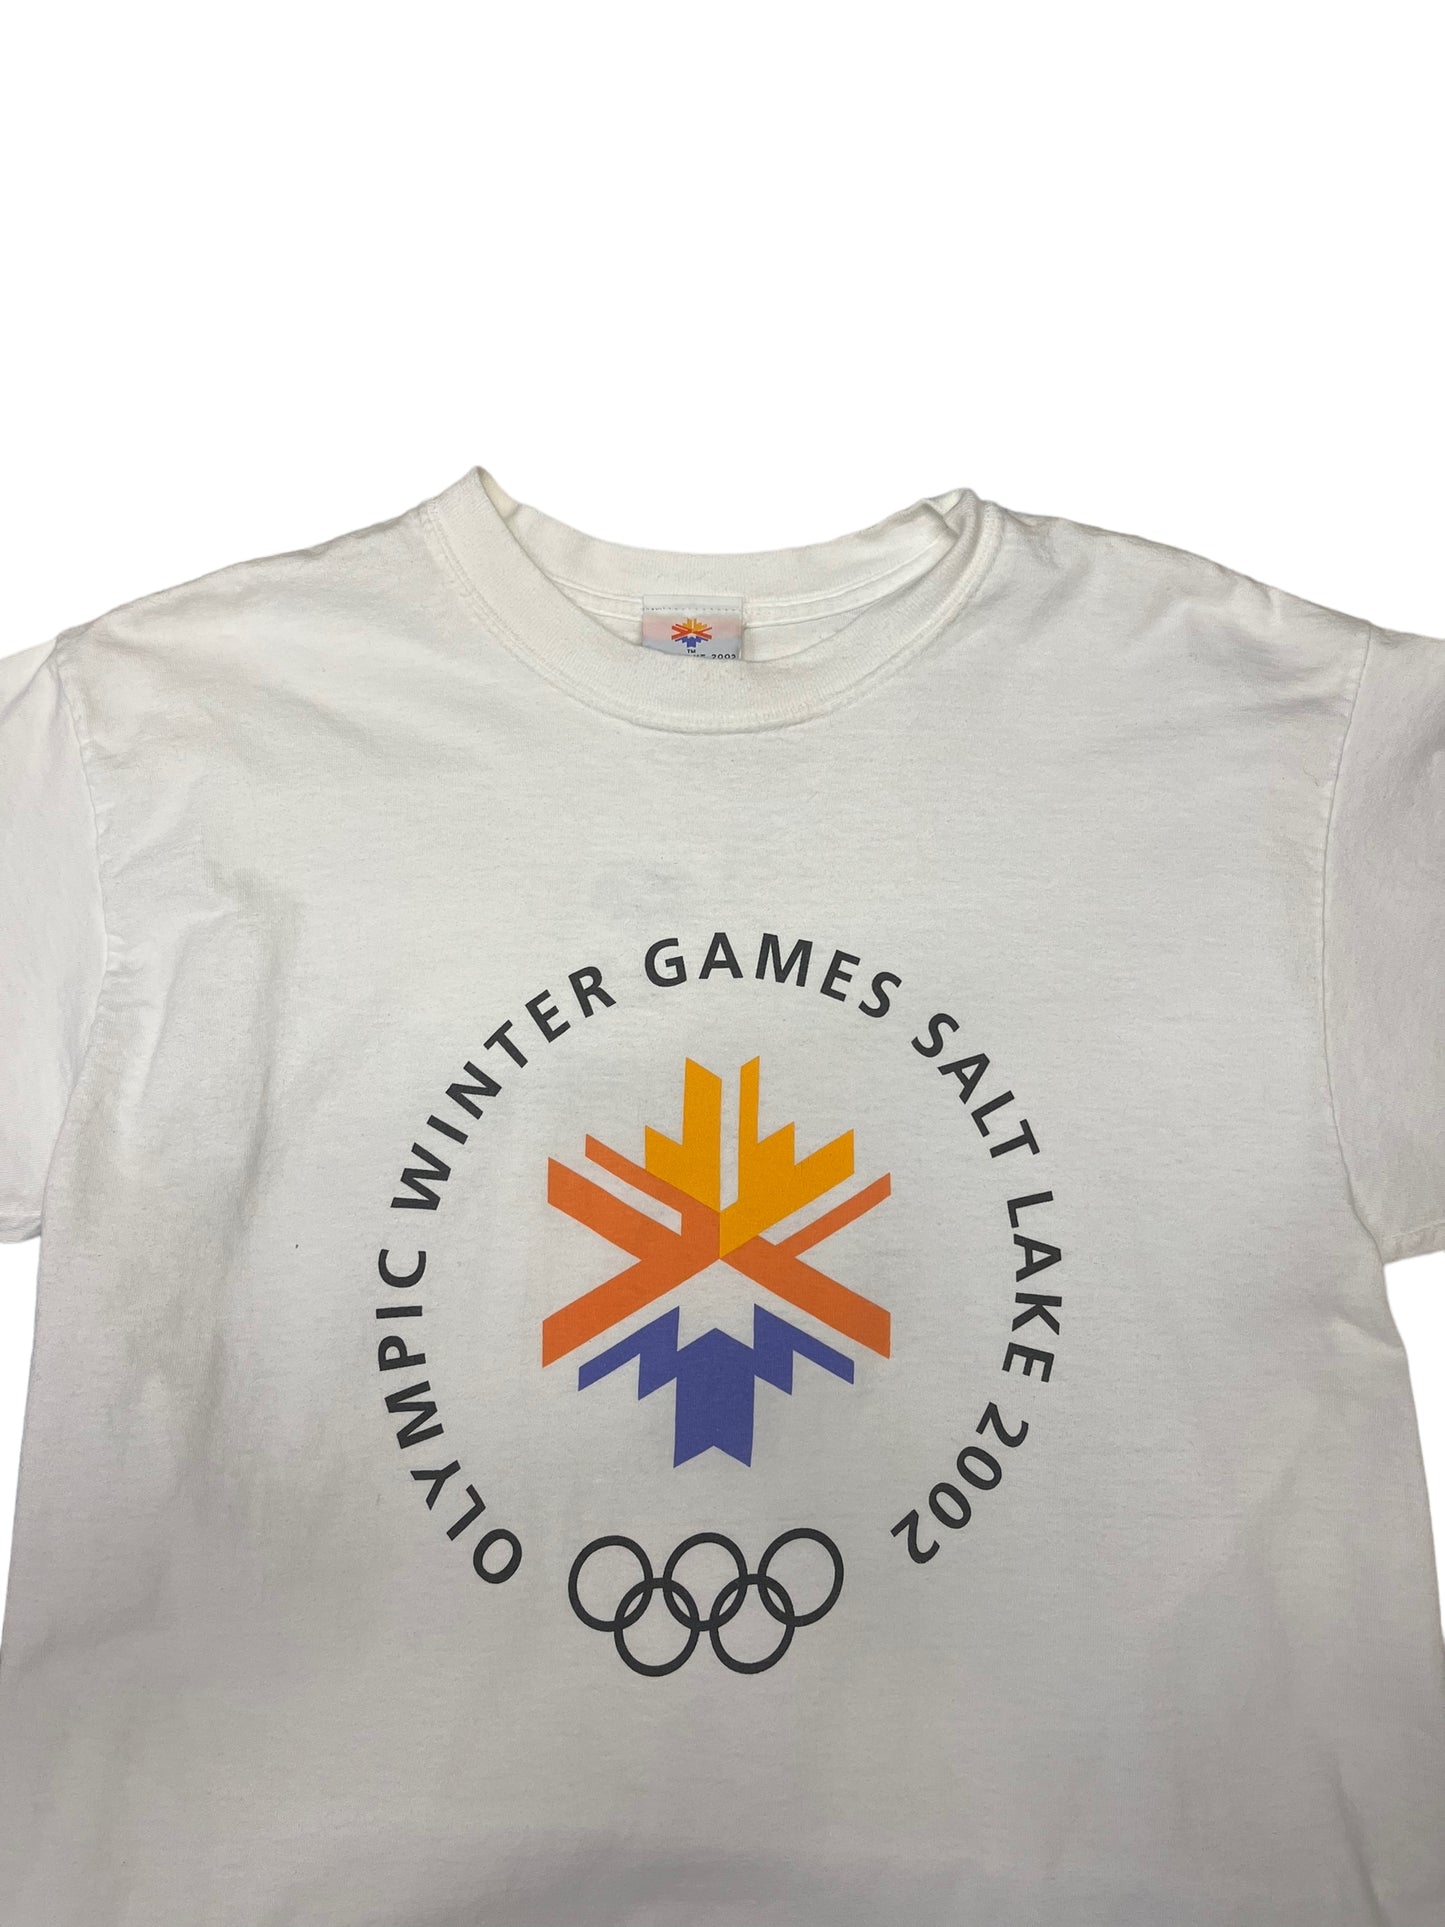 (L) 2002 Olympic Winter Games Teen